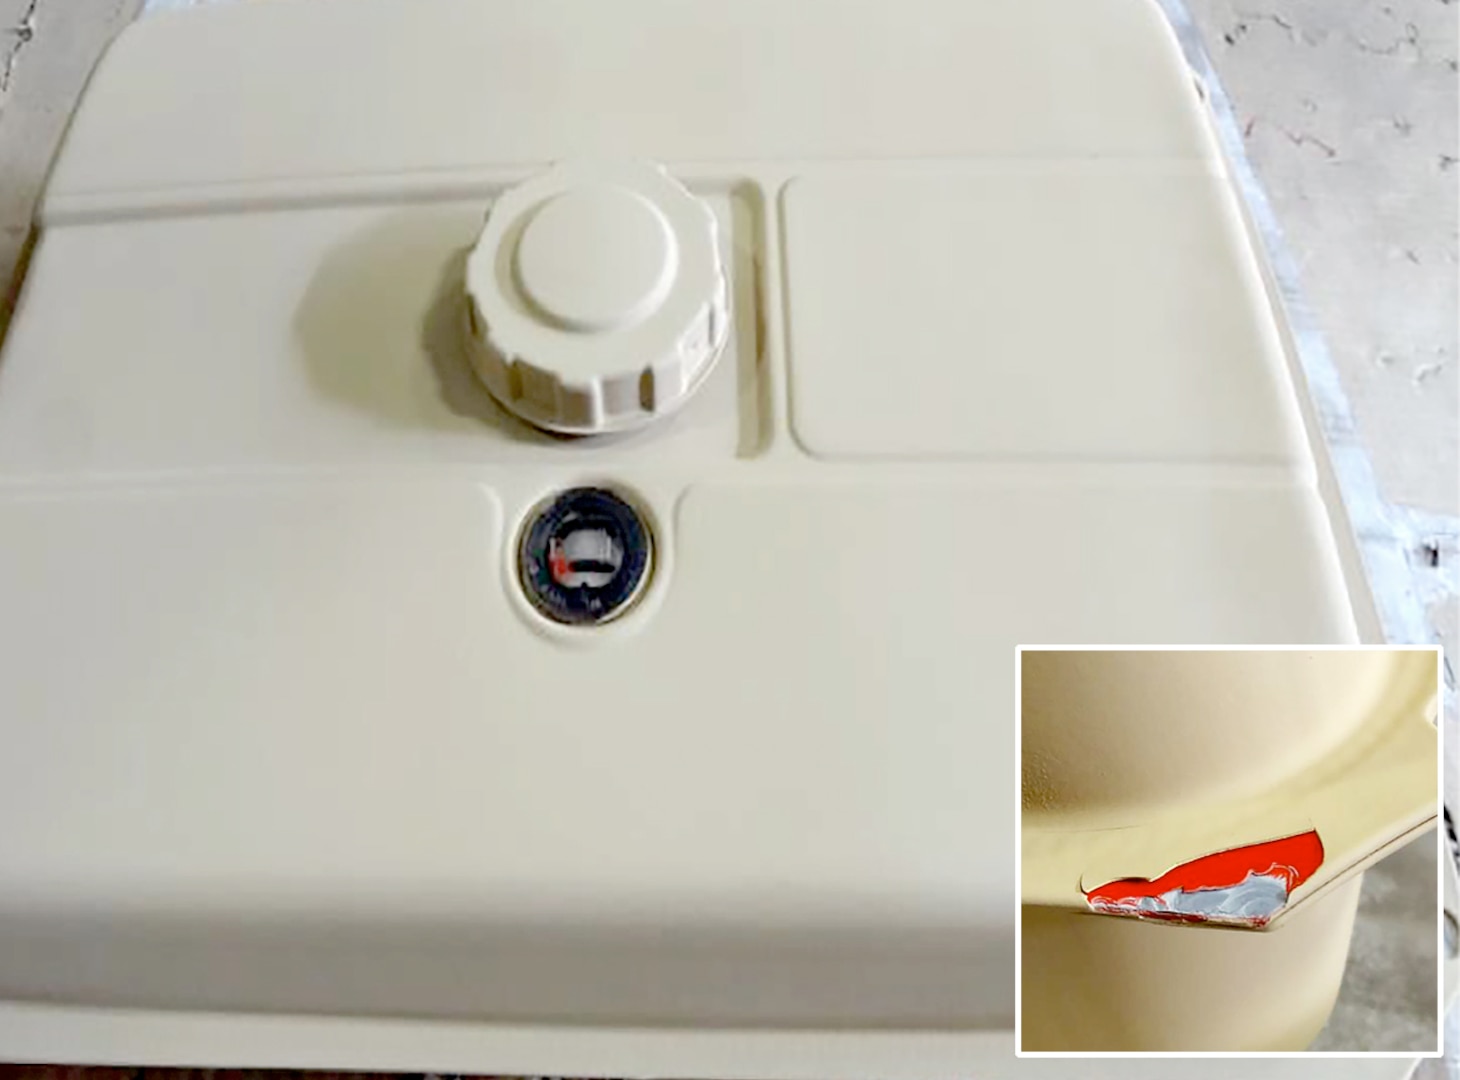 This fuel tank appears to conform to standards. The inset image shows how incorrect packaging can damage the tank. This particular damage revealed a commercial item painted to appear to be a military-grade item. 